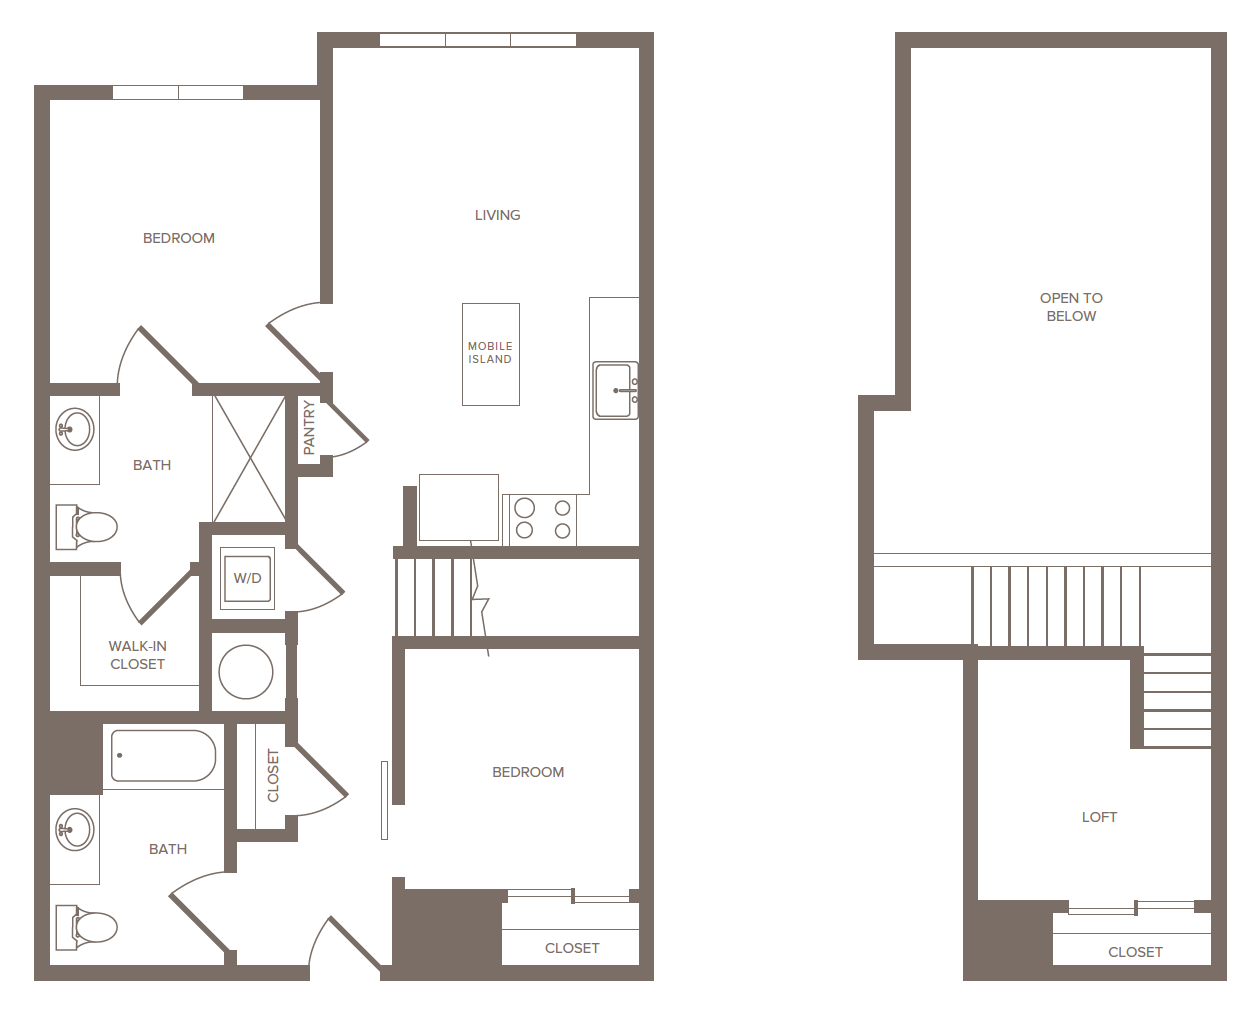 Floorplan for Apartment #2275, 1 bedroom unit at Halstead Parsippany